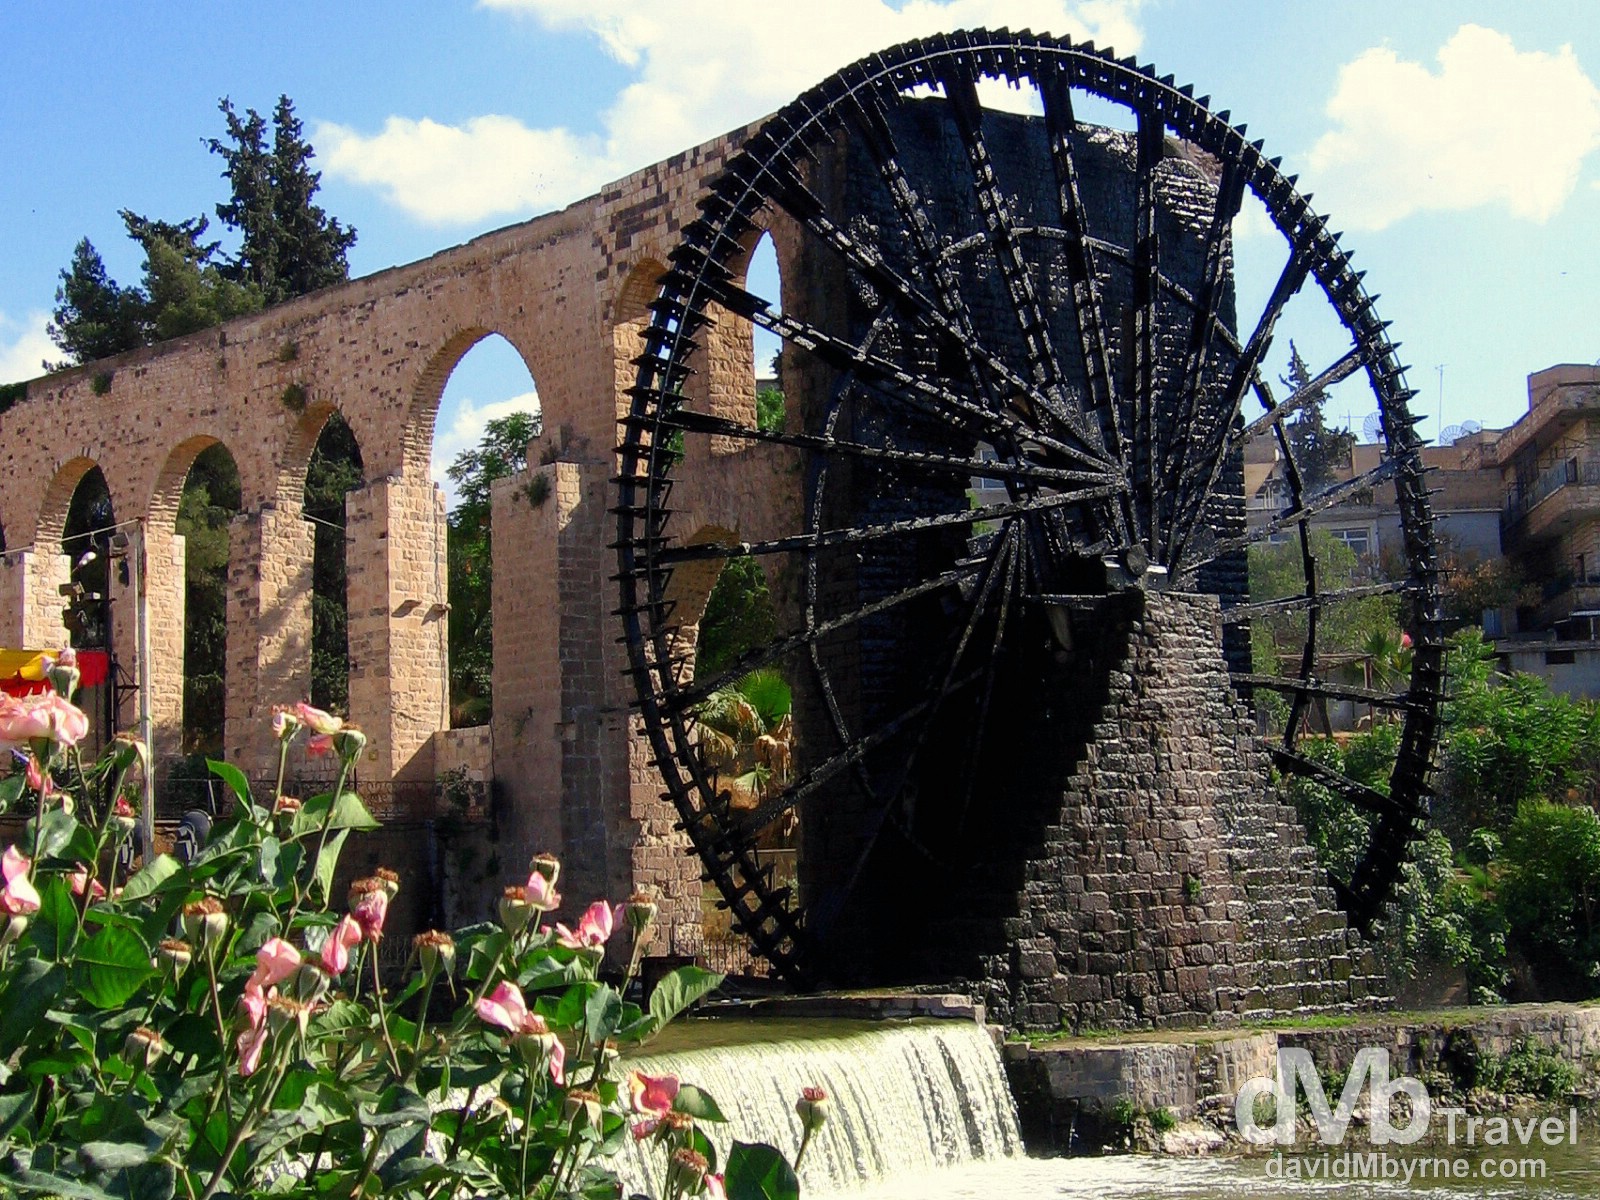 One of the 17 remaining norias (‘wheels of pots’) on the Orontes river in Hama, Syria. May 6, 2008.